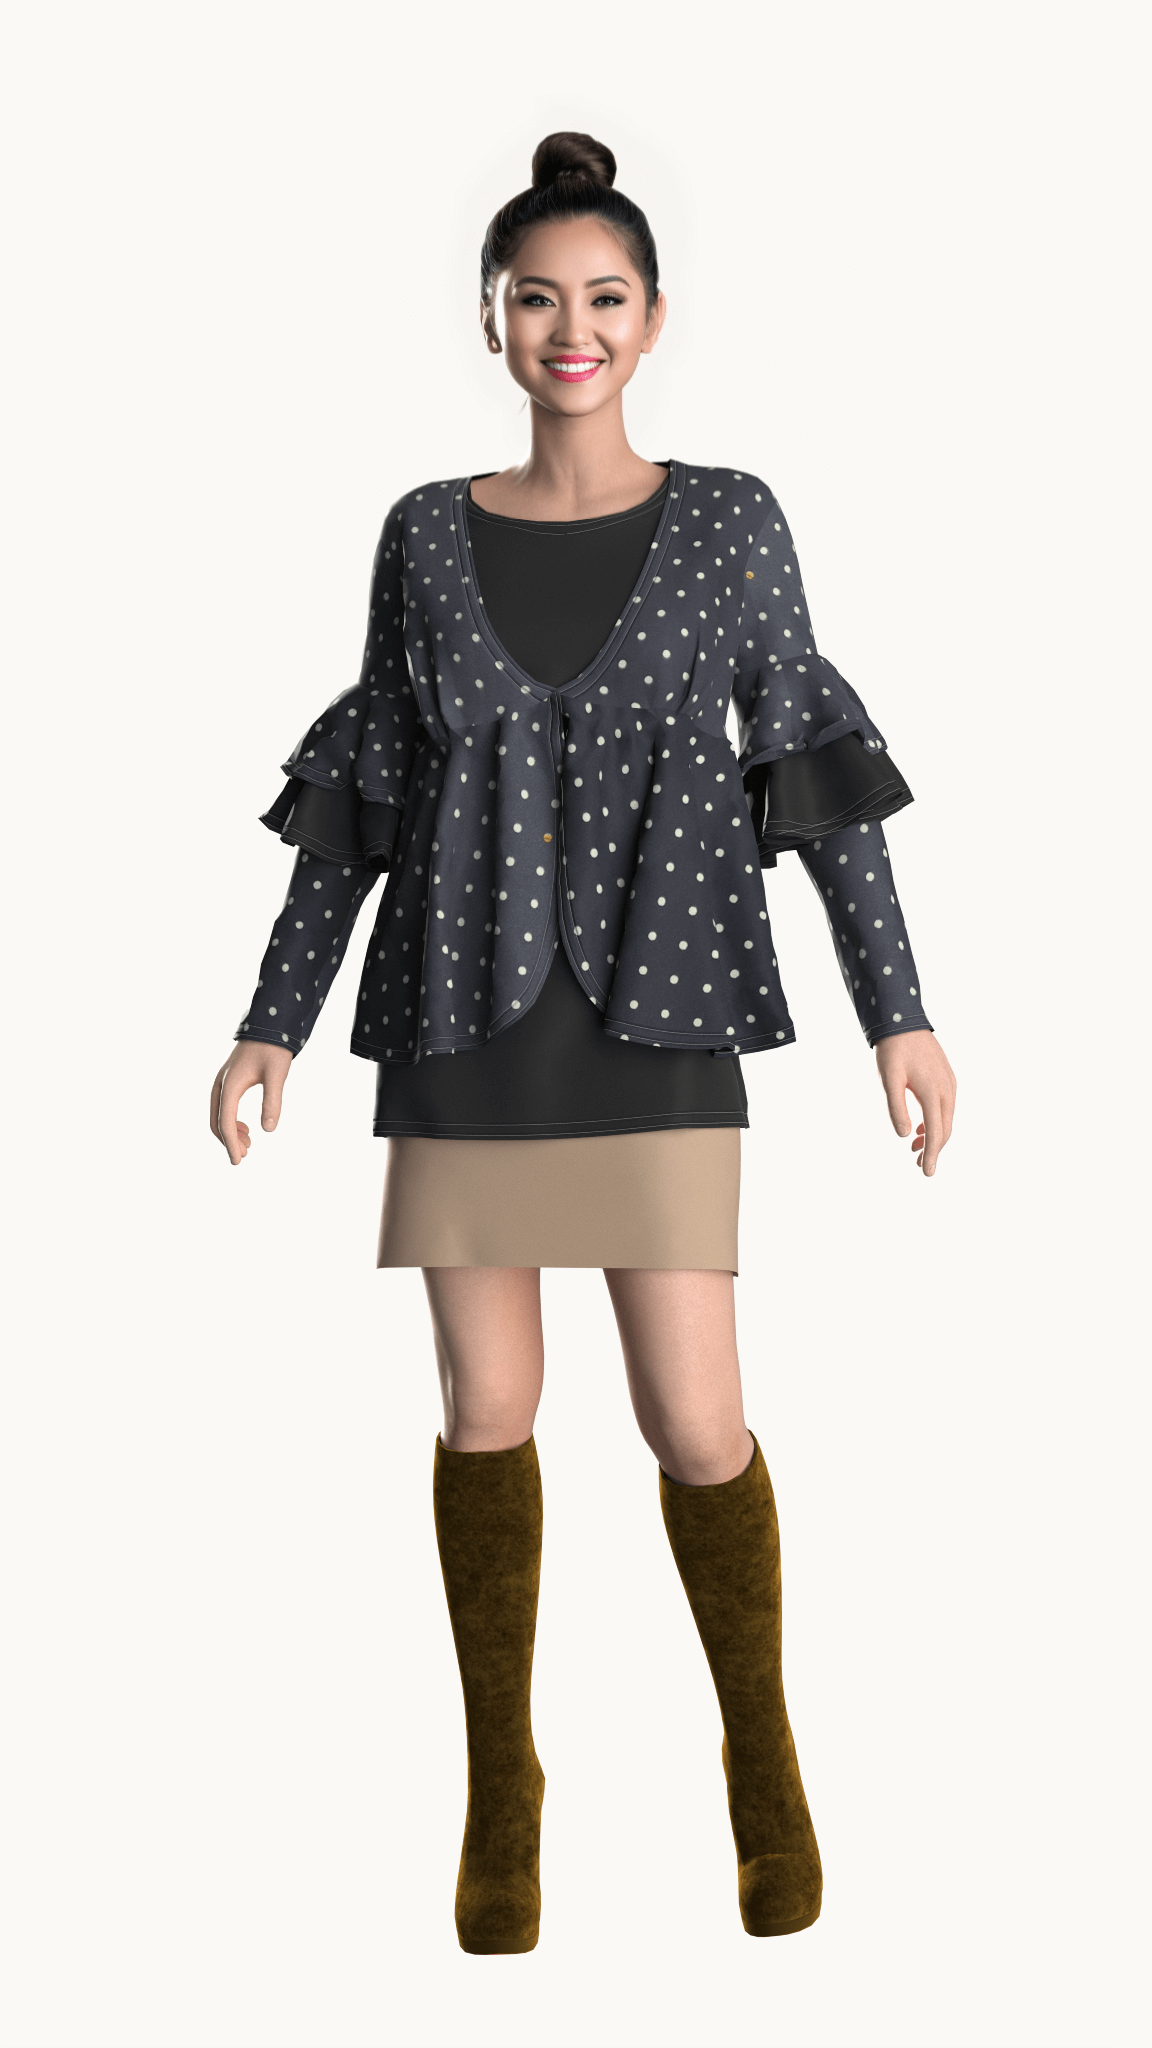 This stylish top features a layered bell sleeve for a unique look and added volume. Its lightweight fabric ensures free and comfortable movement, perfect for any busy day. Its layered design ensures an elegant and sophisticated, yet effortless, look.House of Supr